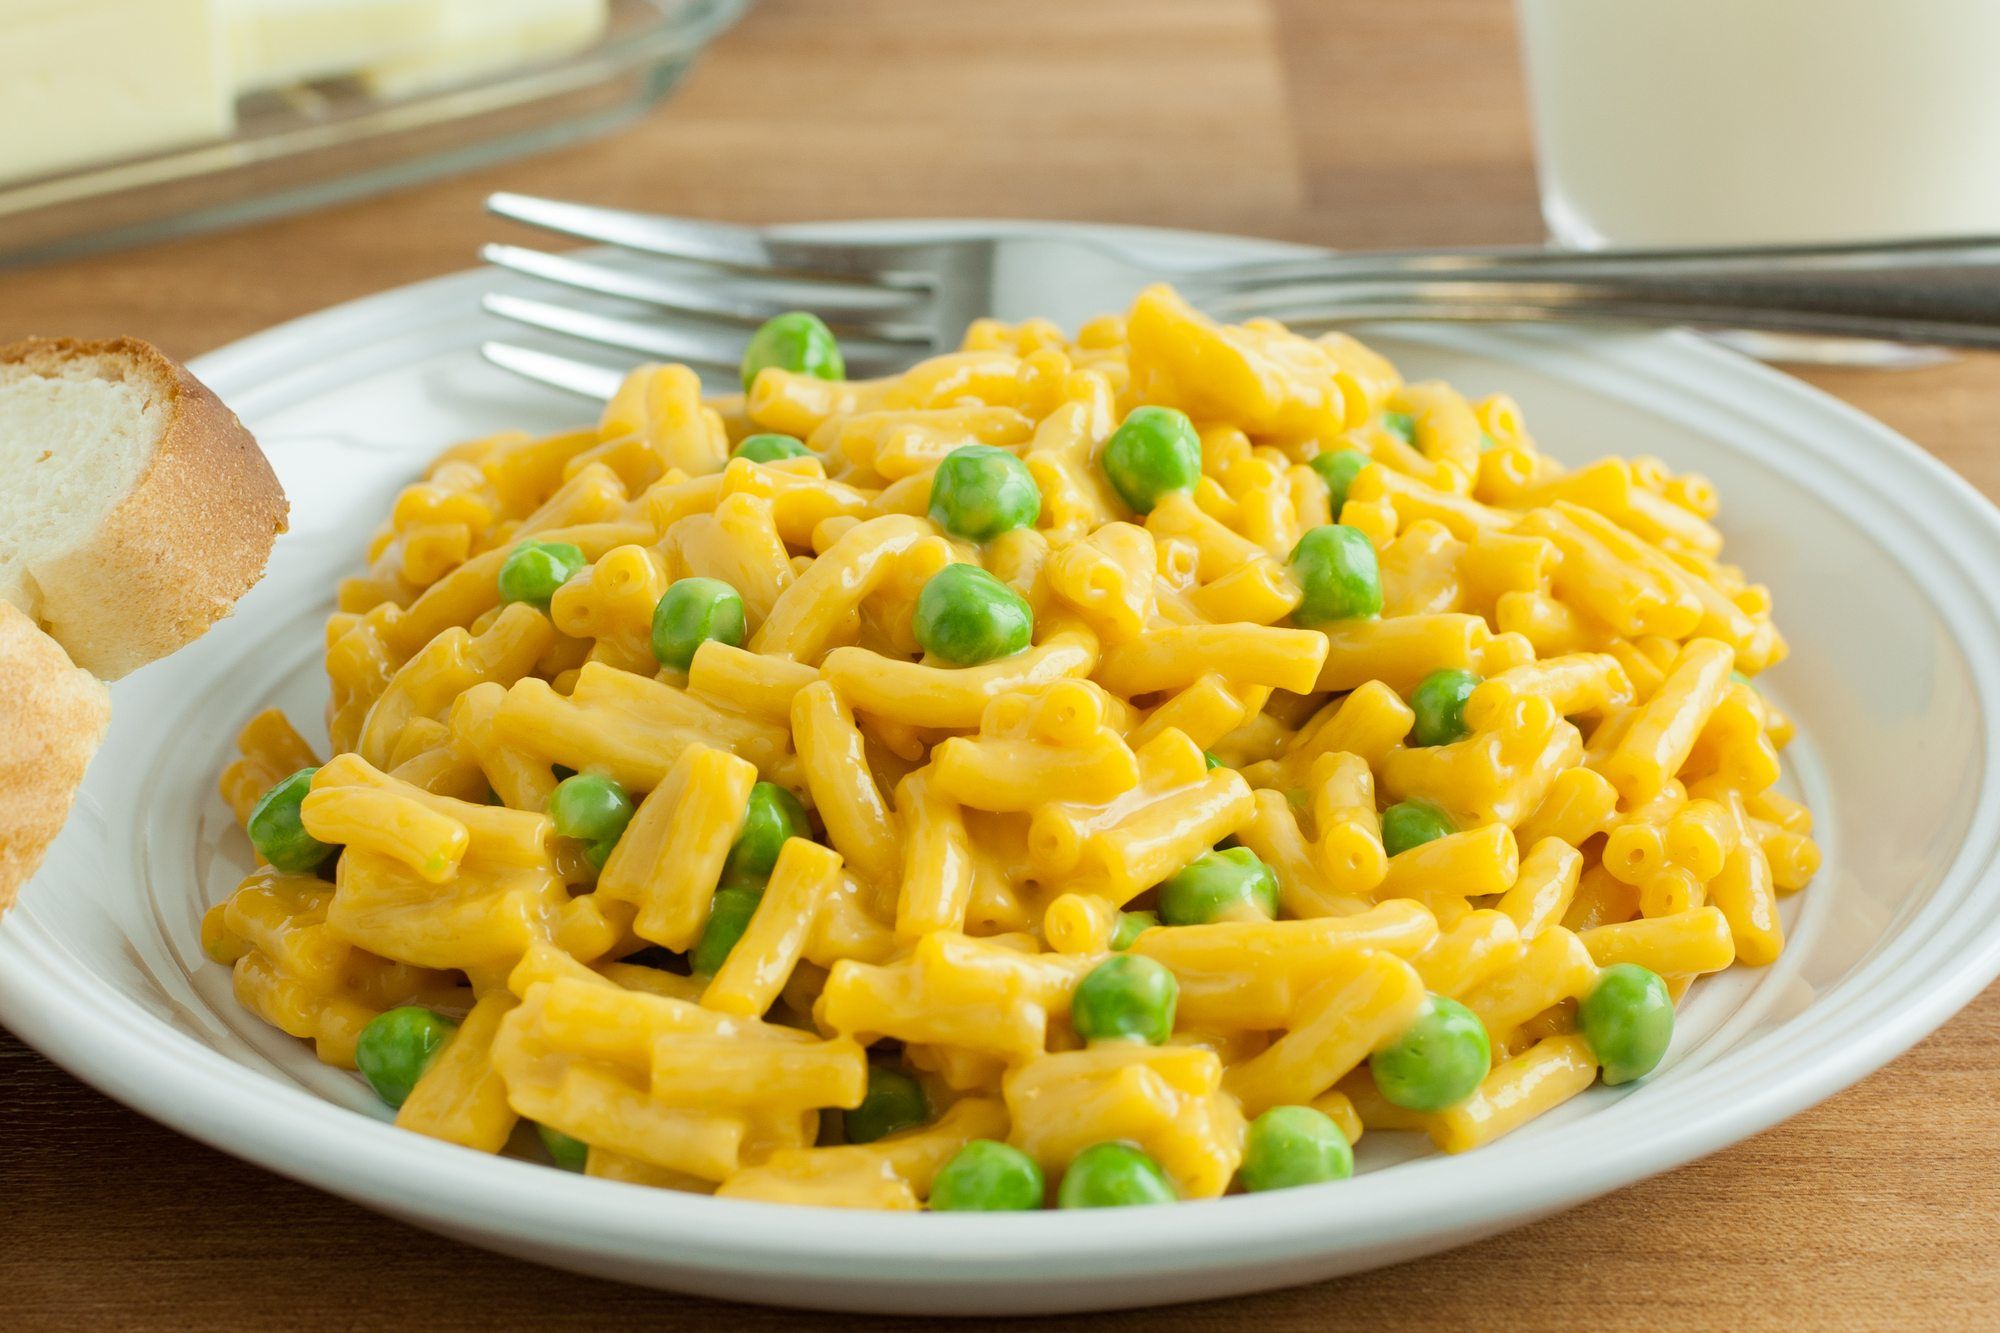 General Mills Targeted in Another Toxic Mac and Cheese Class Action